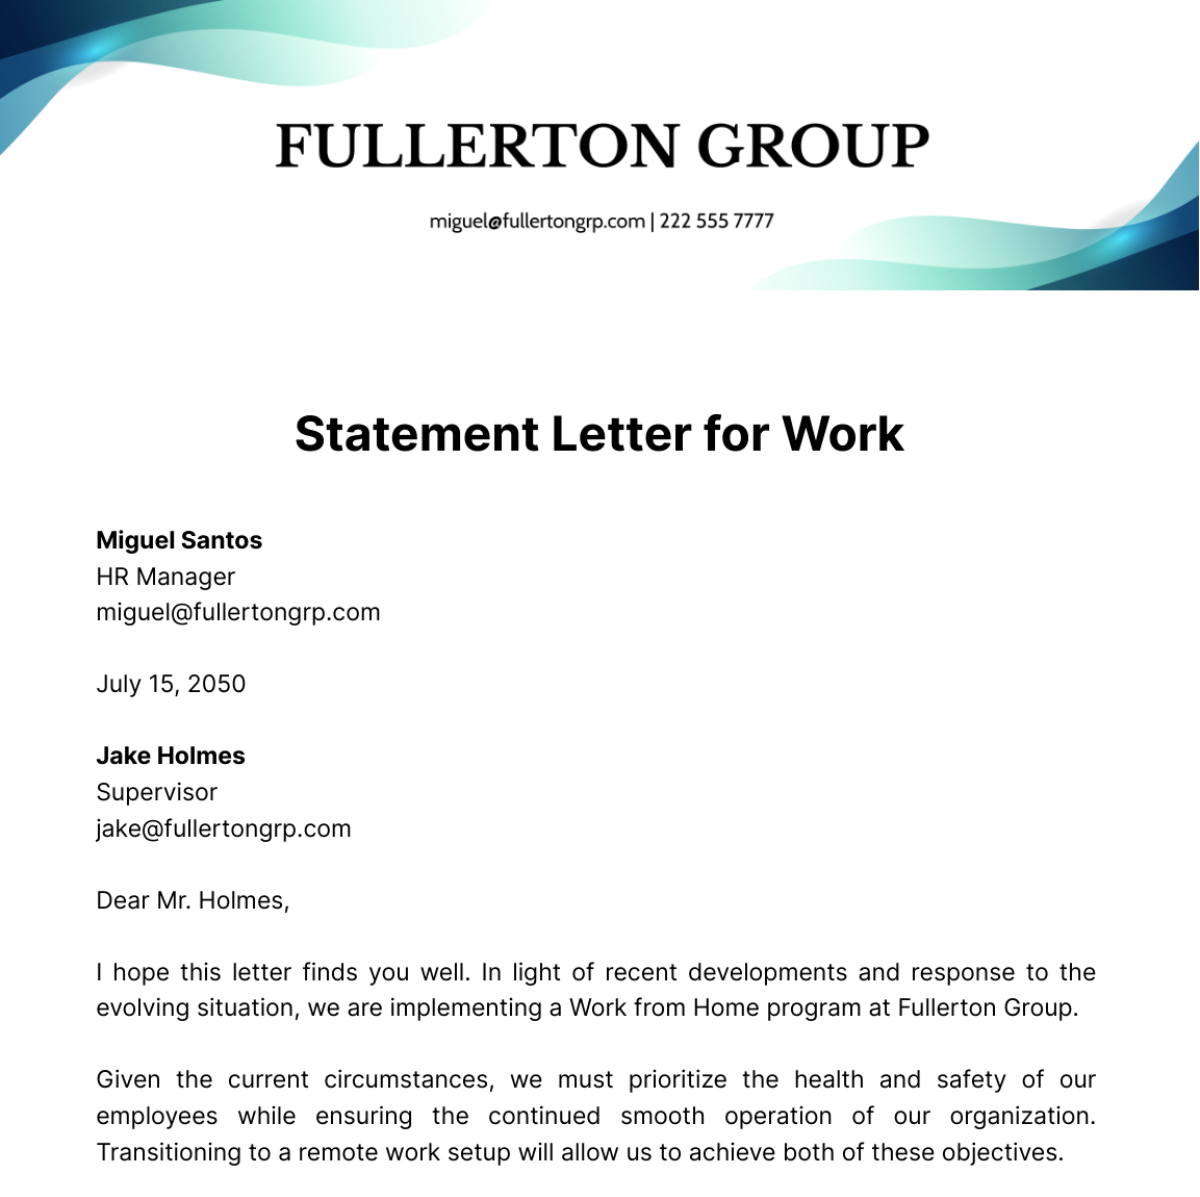 Statement Letter for Work Template